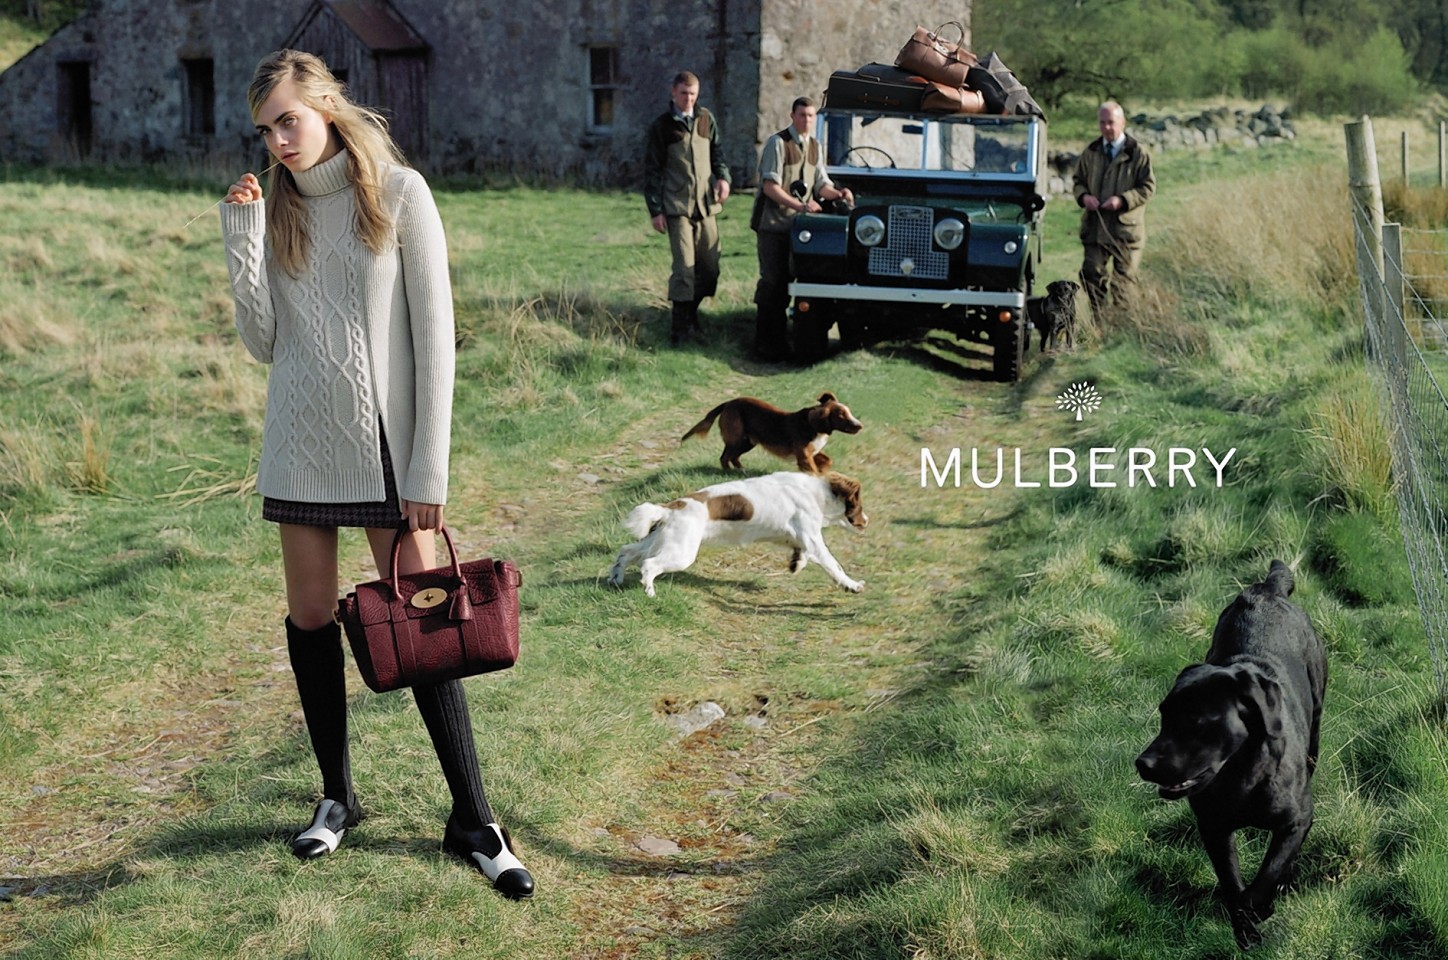 Cara Delevingne in the Highlands modelling Mulberry clothing